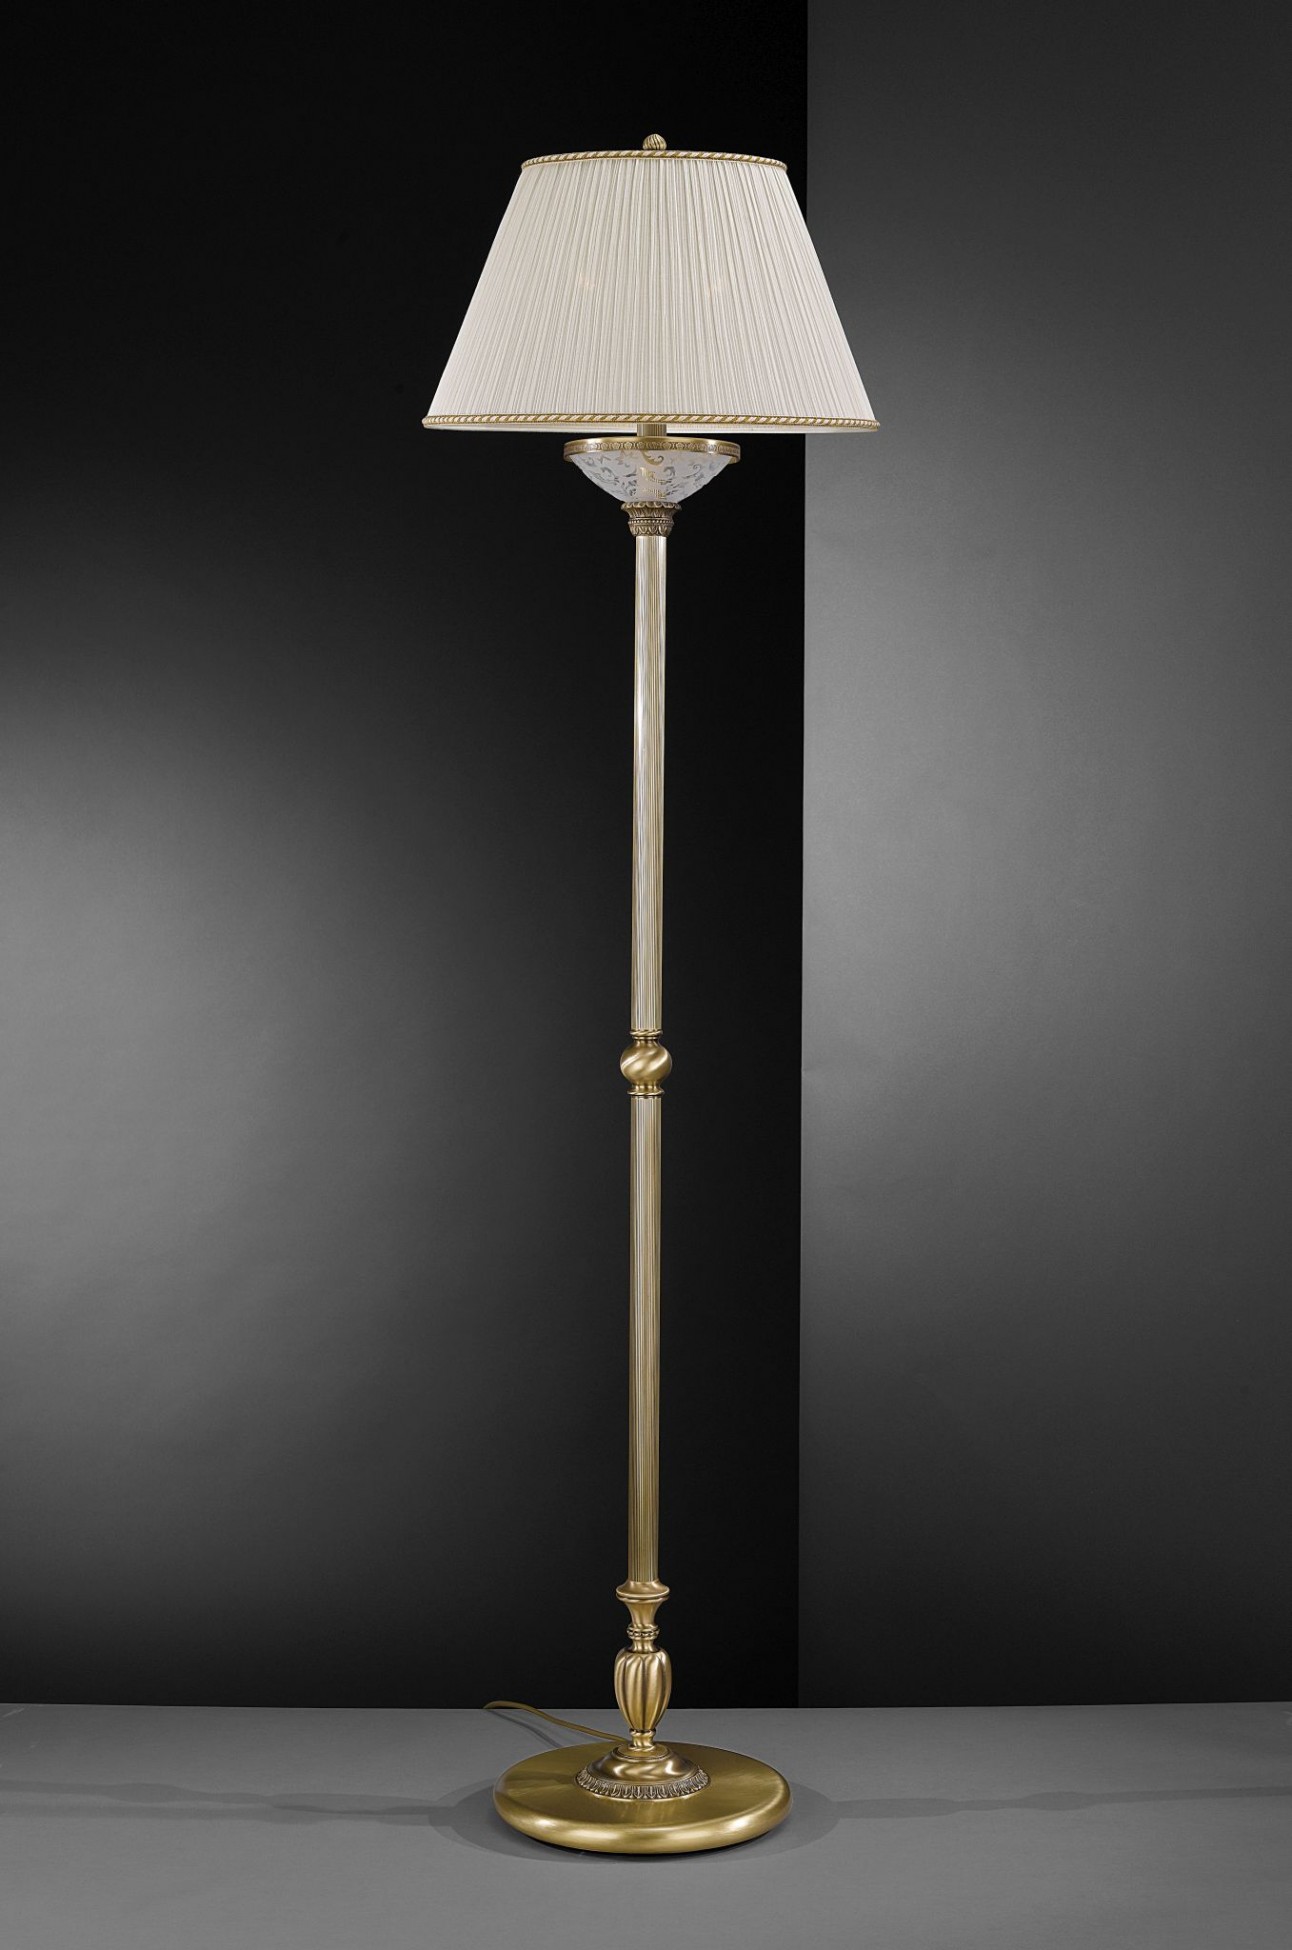 Brass Floor Lamp With Decorated Frosted, Frosted Glass Floor Lamp Shade